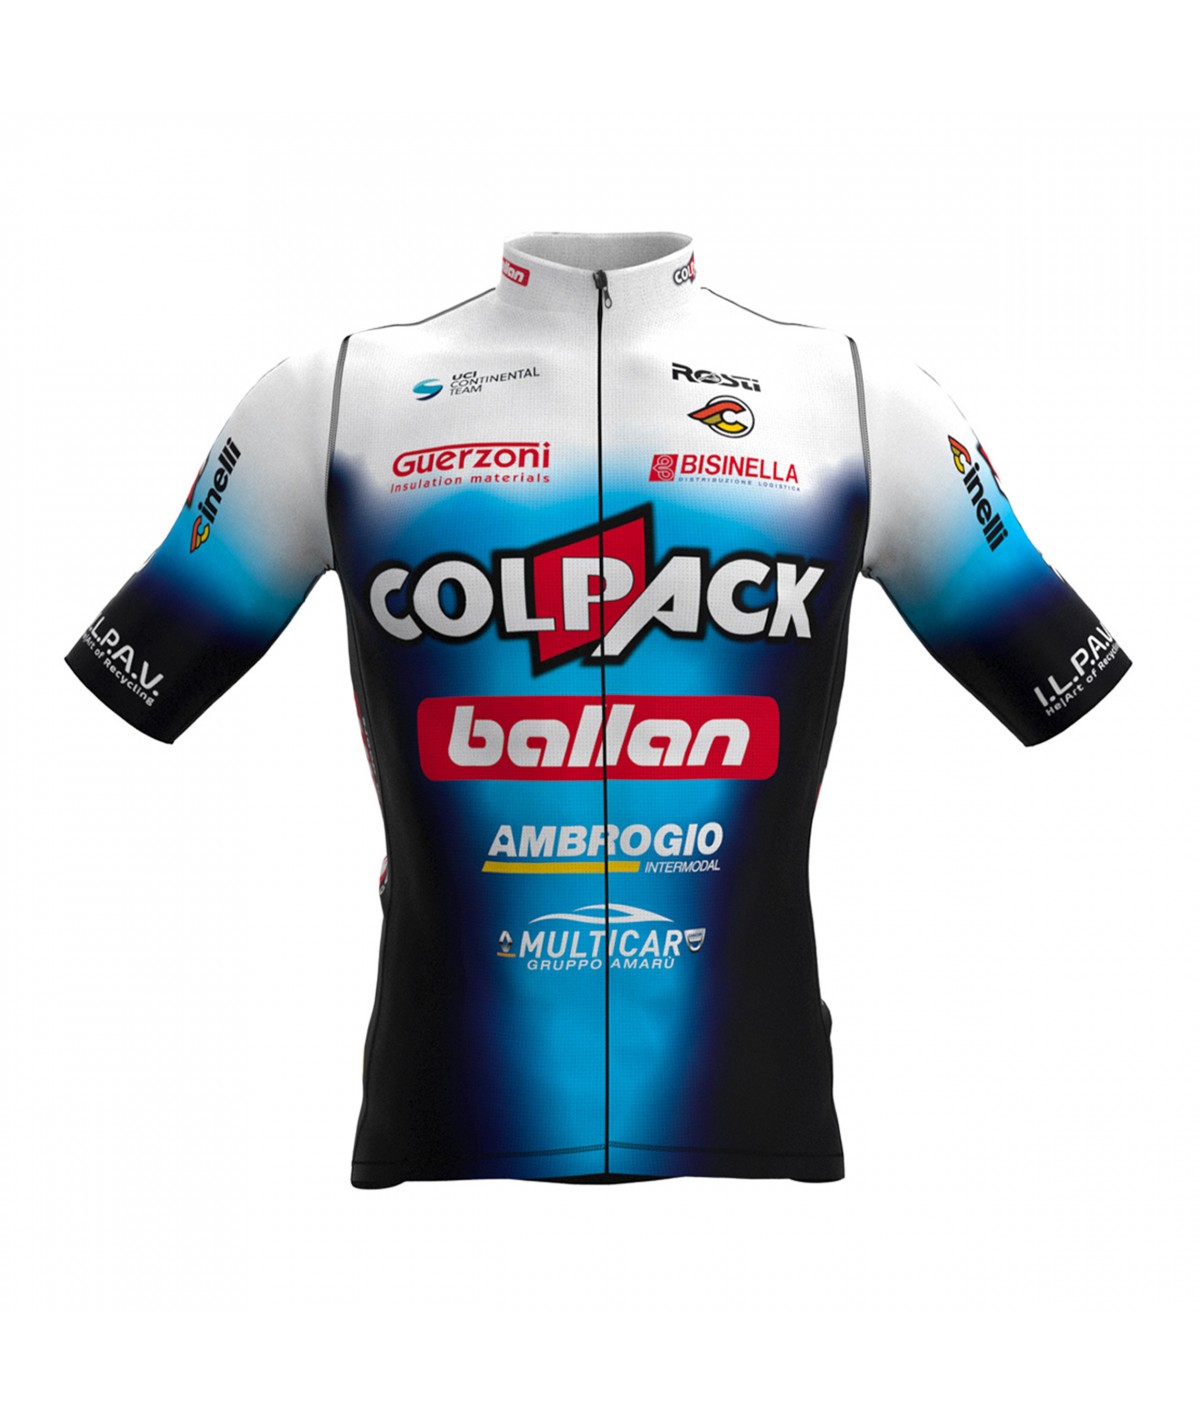 Maillot COLPACK BALLAN Rosti